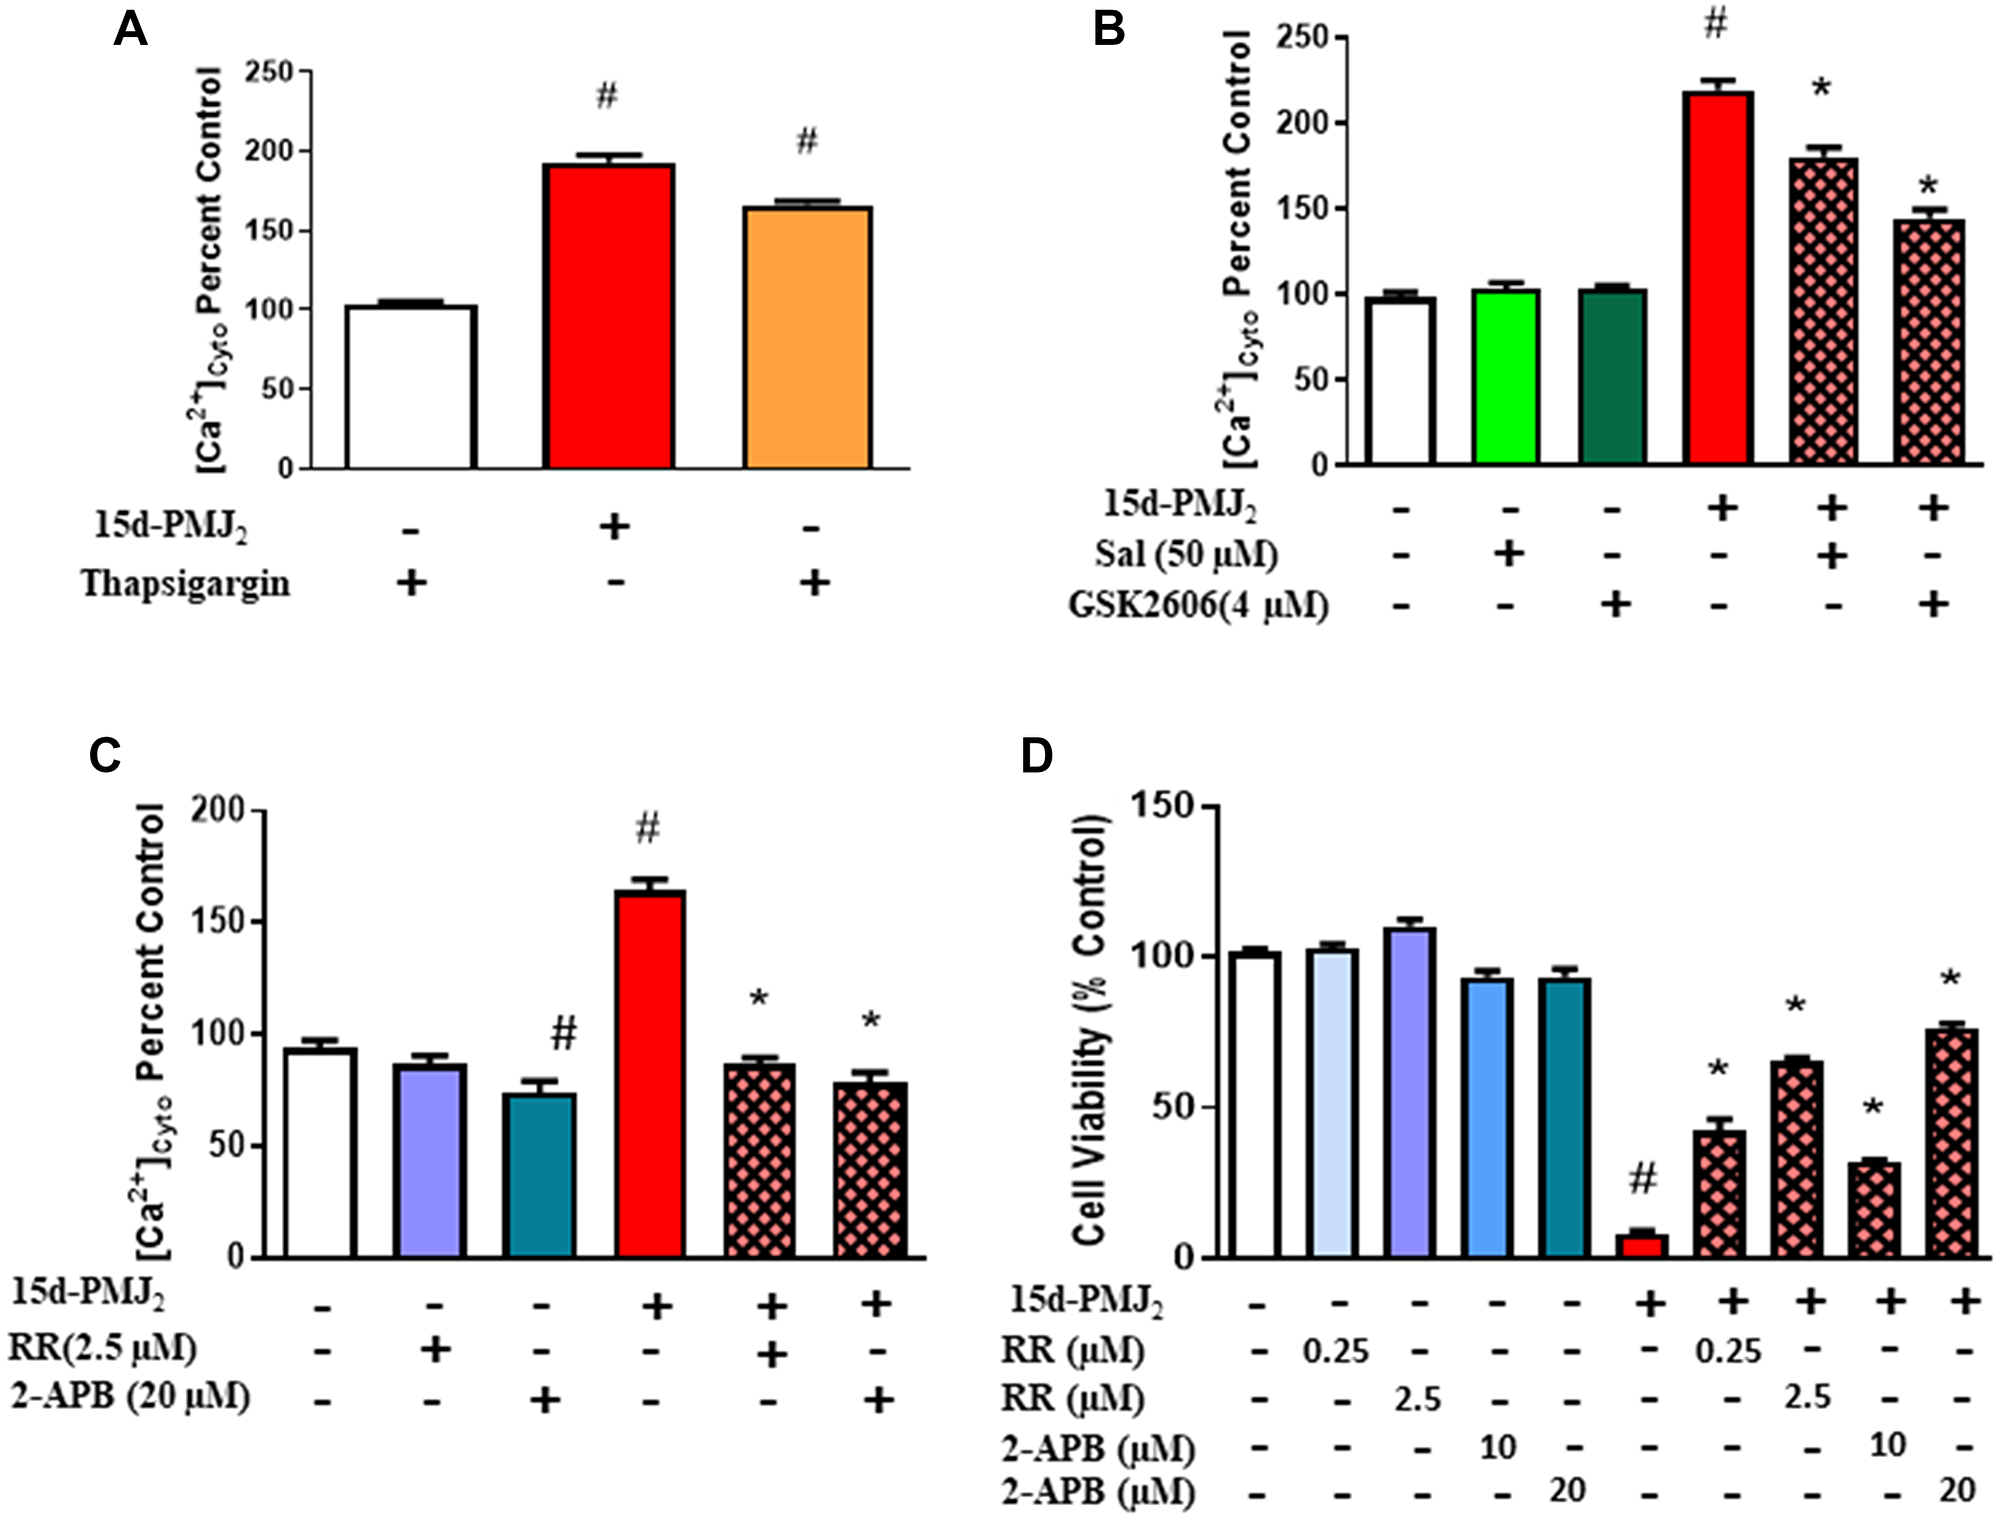 Activation of Ca2+ channels by 15d-PMJ2 is mediated by ER-stress and required for cell death.